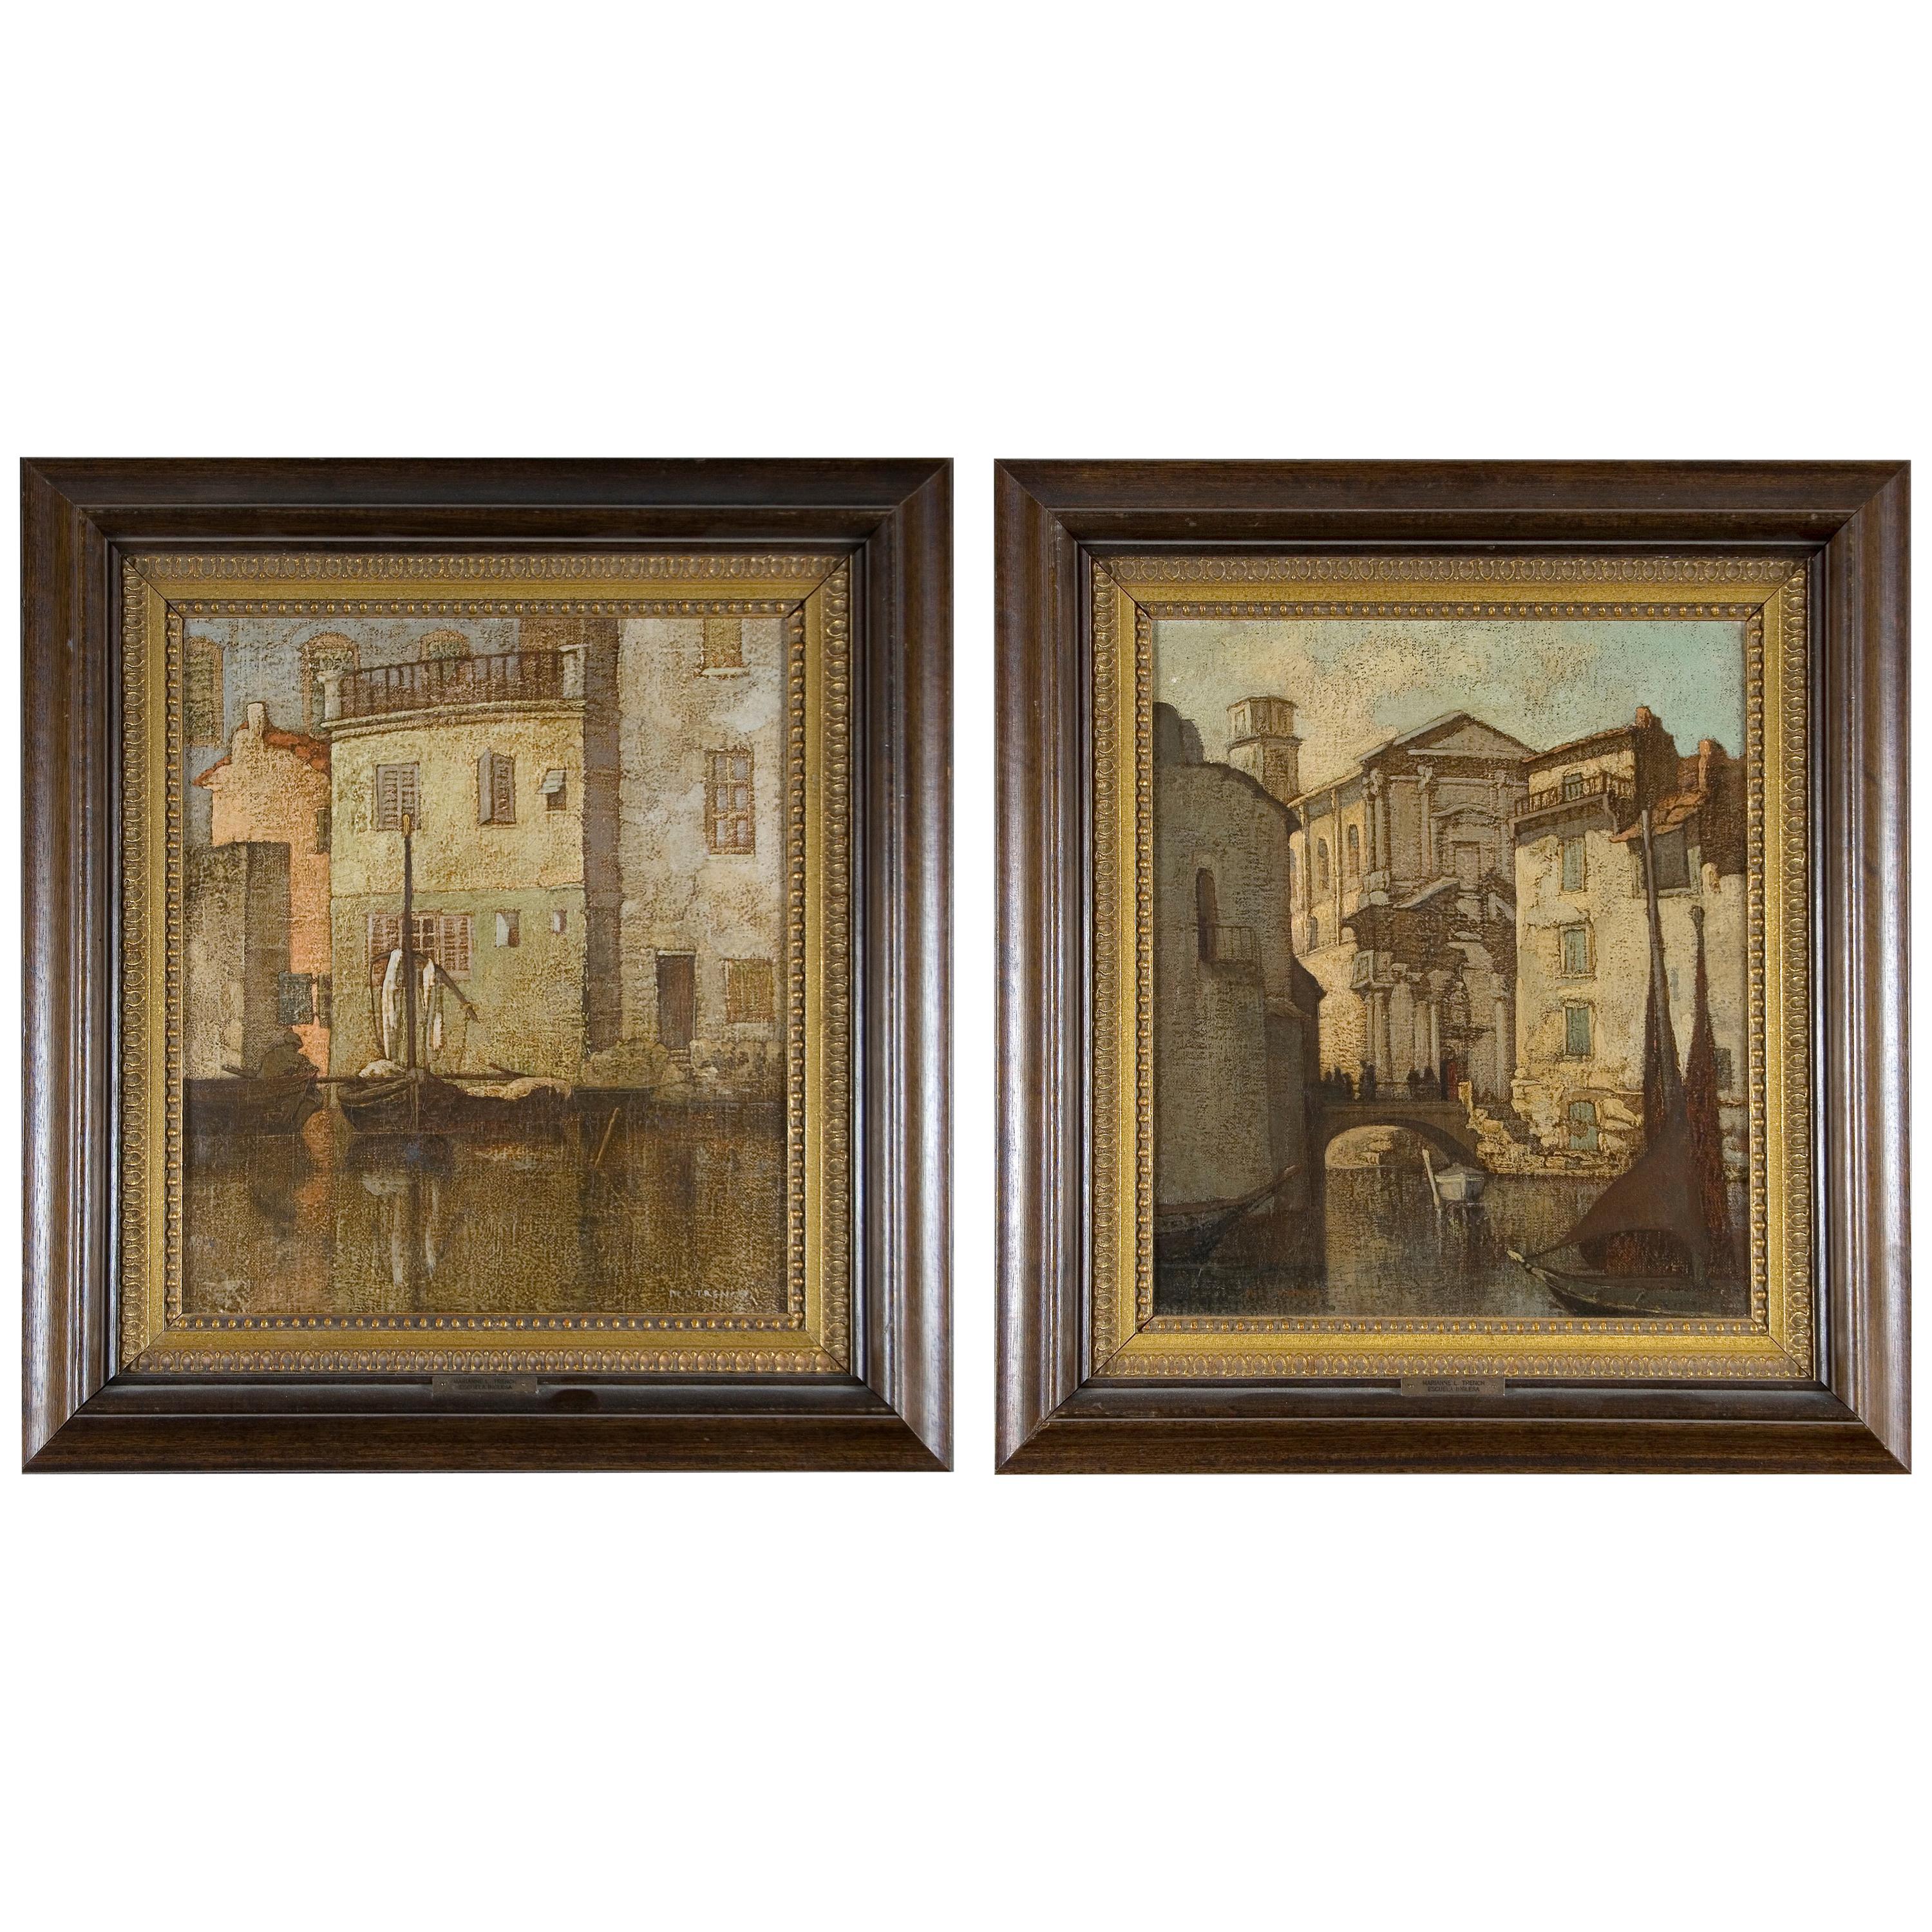 Pair of Urban Views, "Venice", Marianne Lucy Le Poer Trench 'England, 1888-1940'